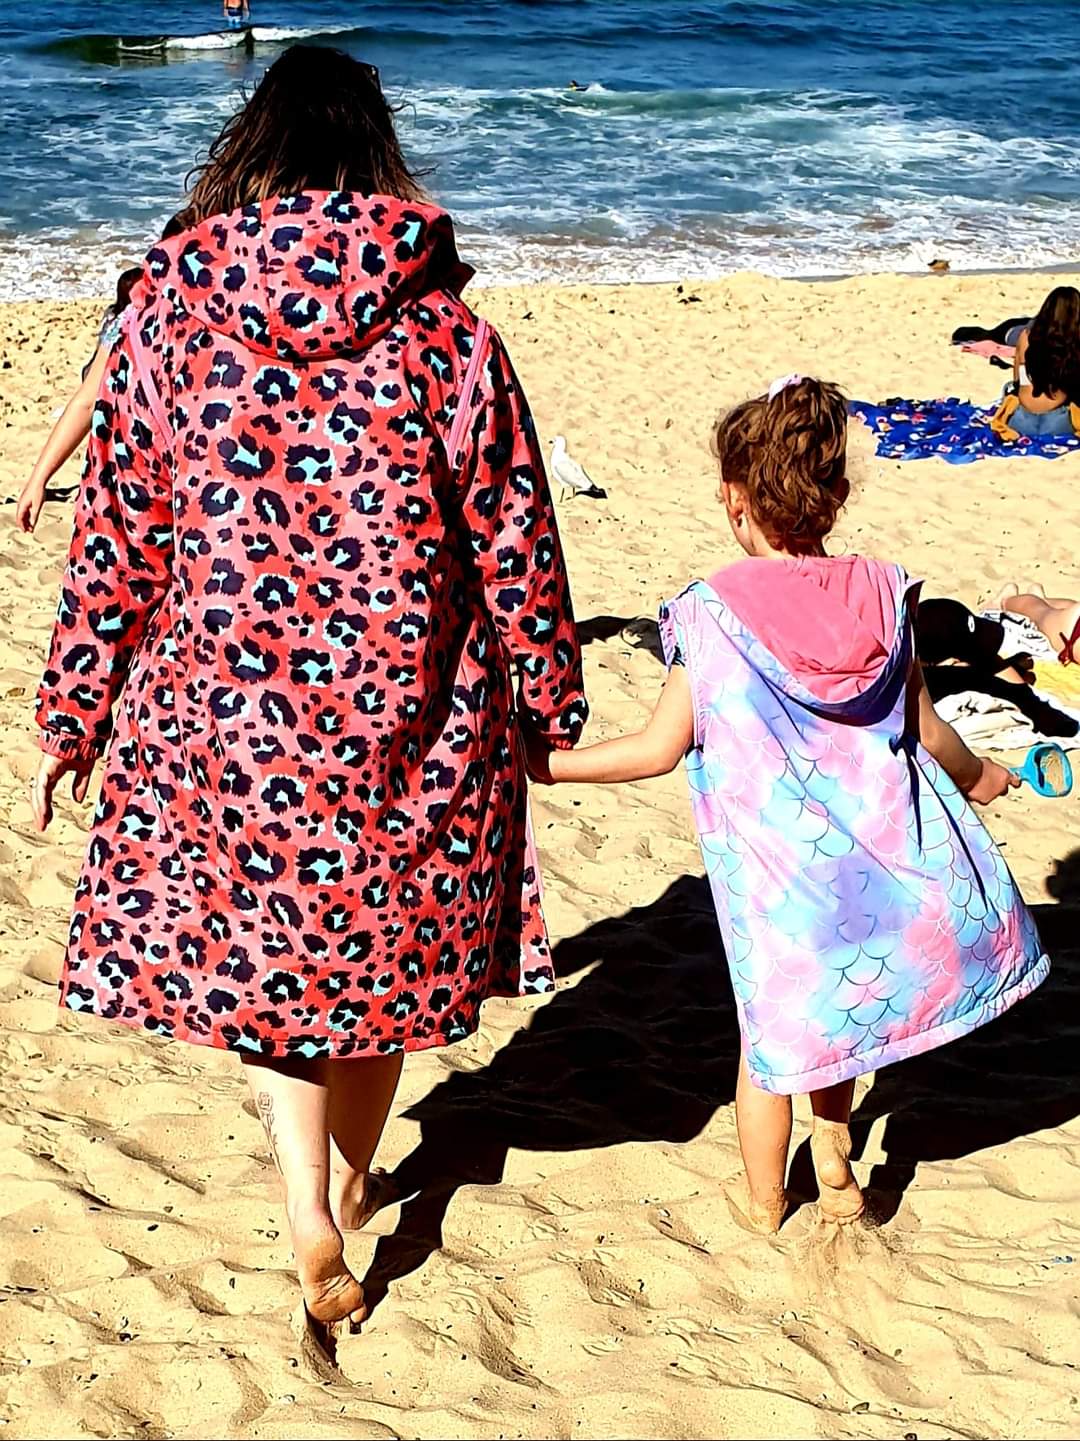 Adult and child holding hands walking on the beach. Adult is wearing a animal print swim parka and child is wearing a mermaid print swim parka. 